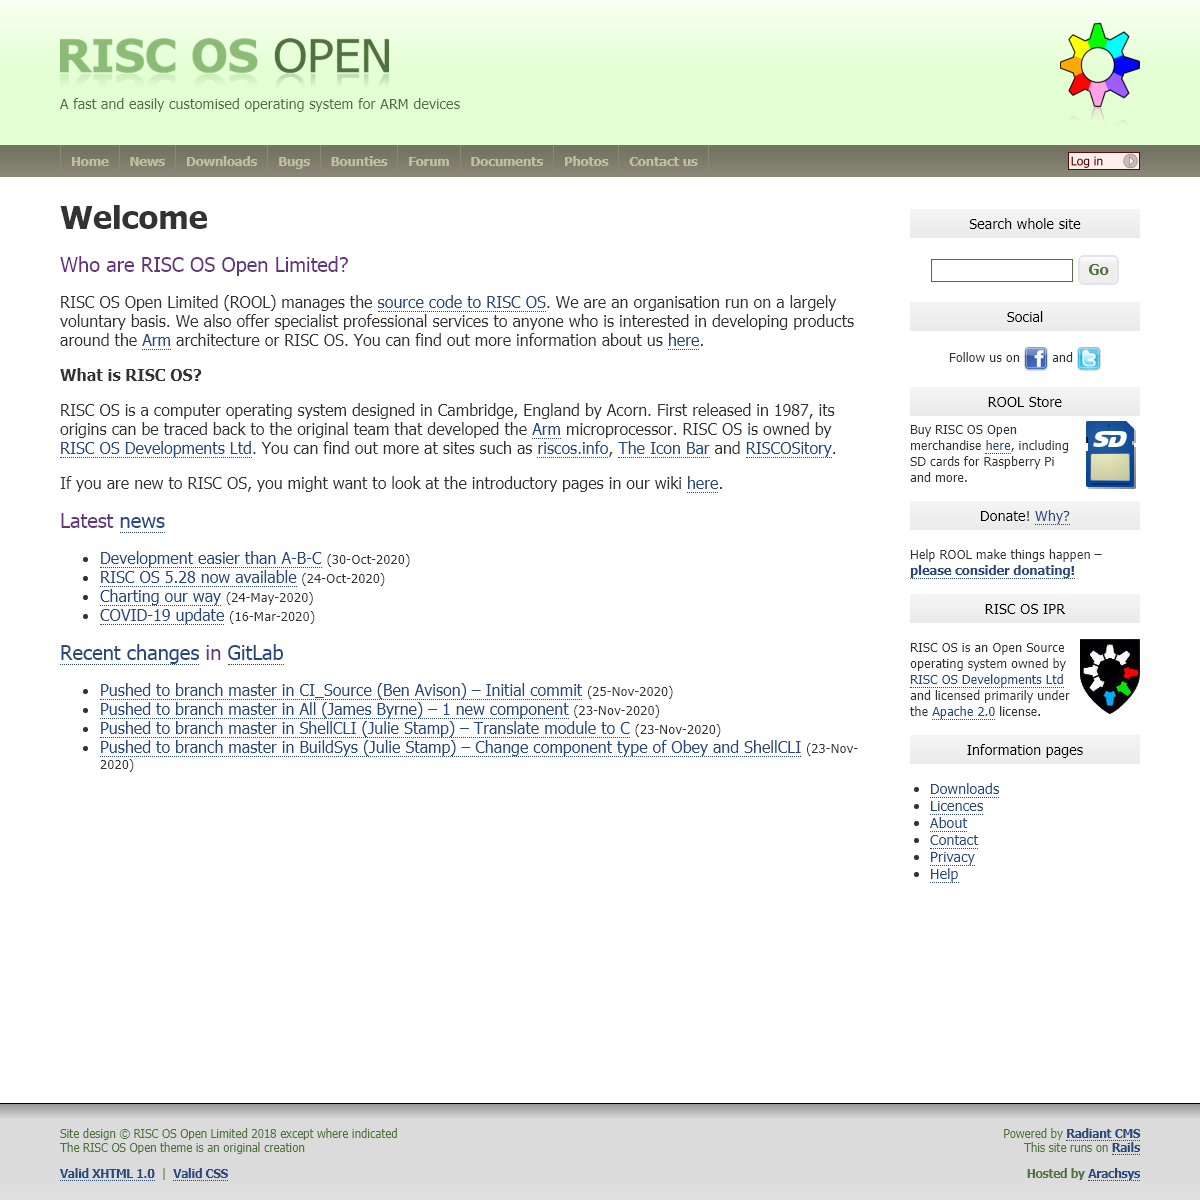 A complete backup of riscosopen.org